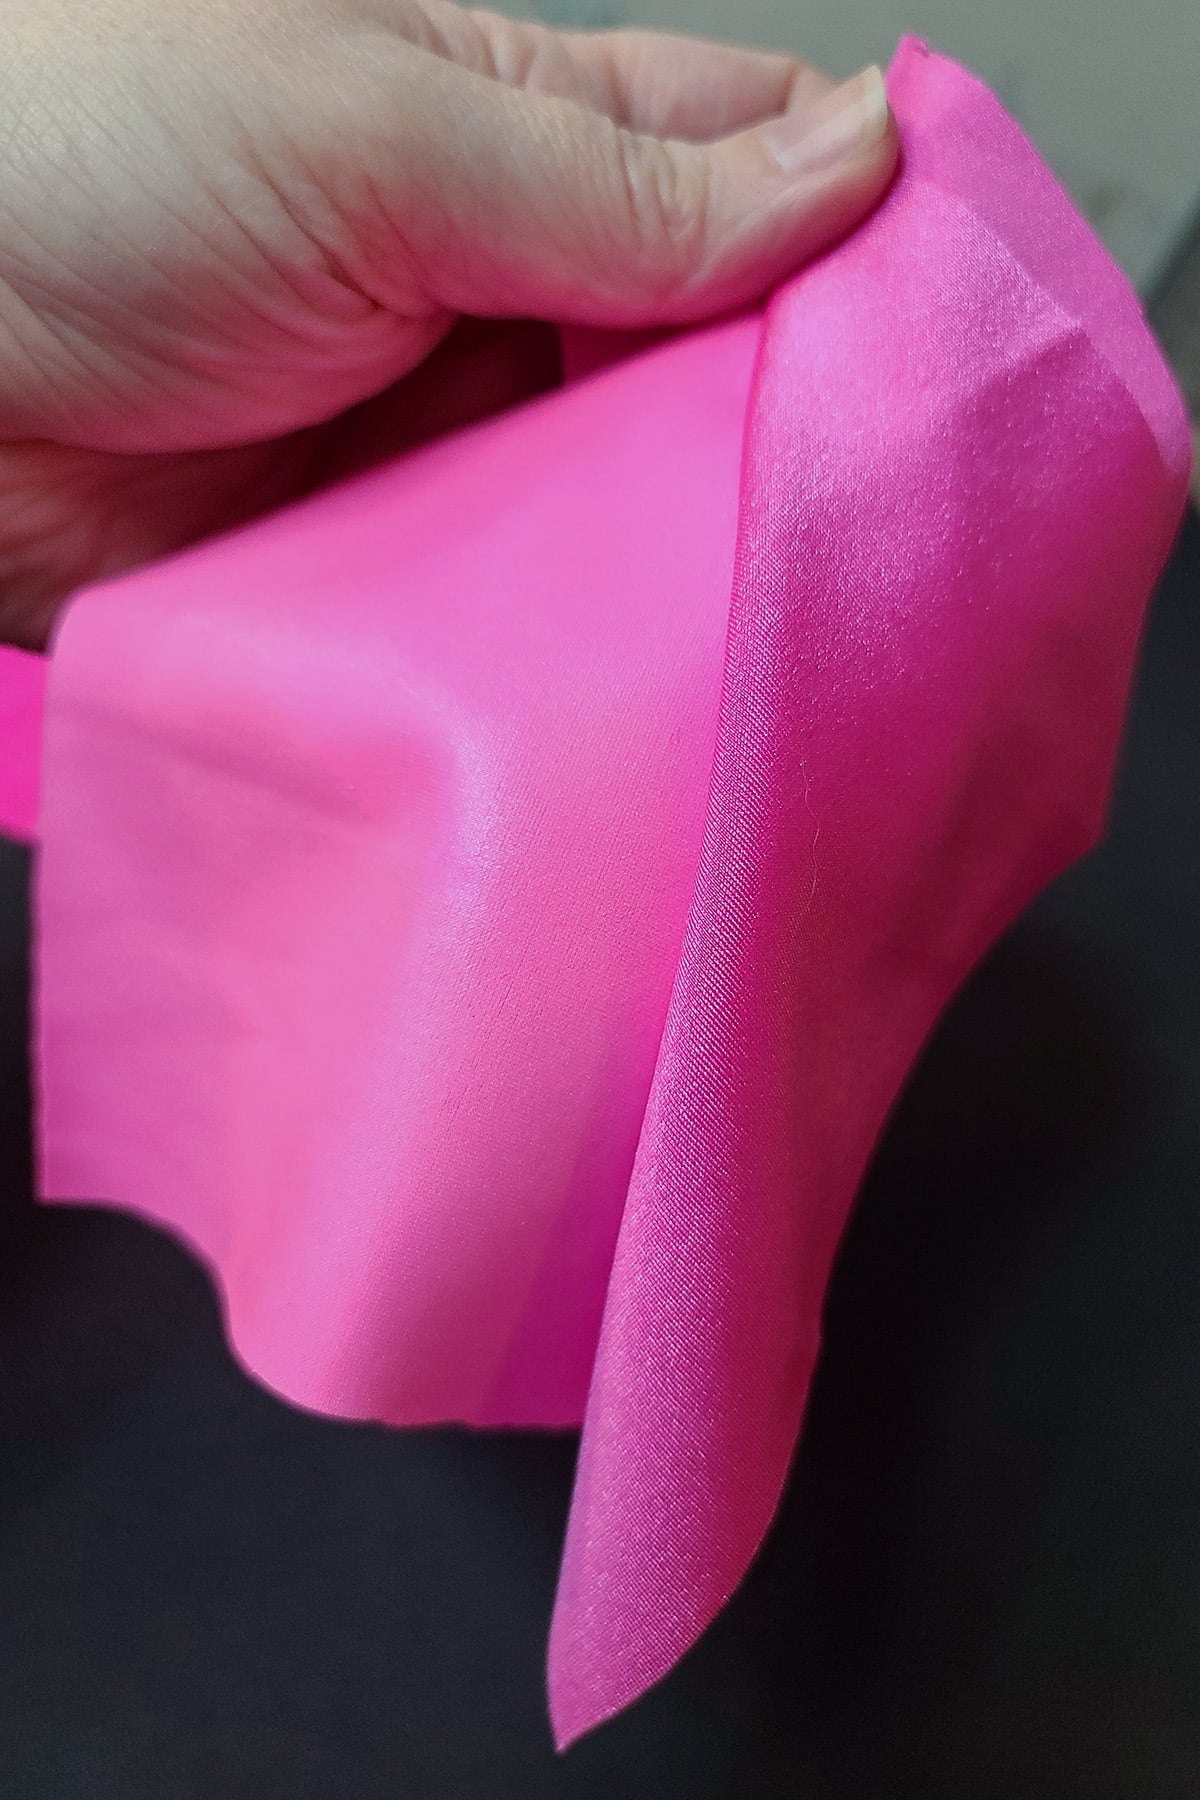 A hand holding a piece of shiny pink spandex next to a piece of wet look pink spandex.